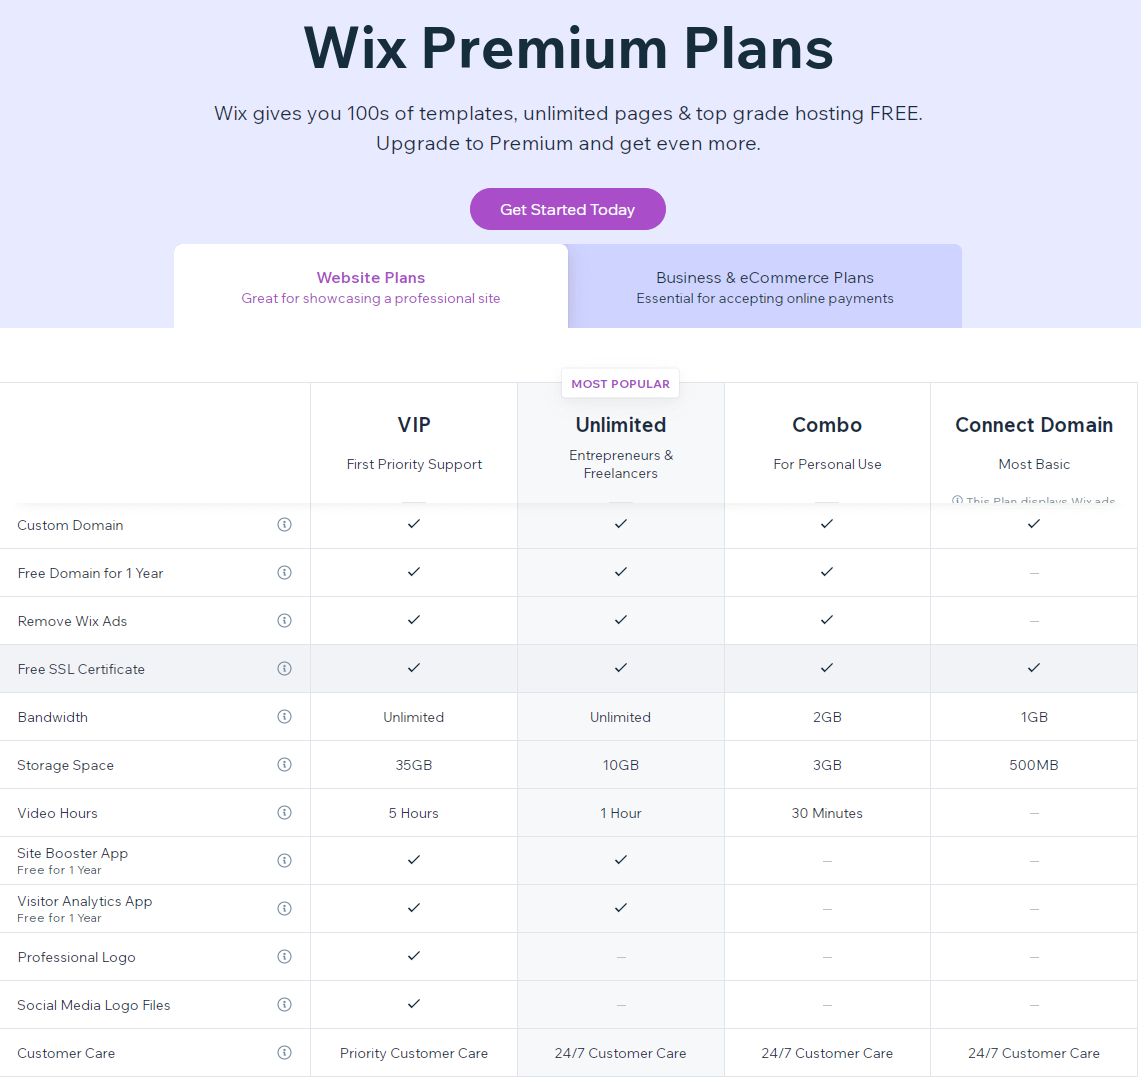 Types of Hosting Offered by Wix